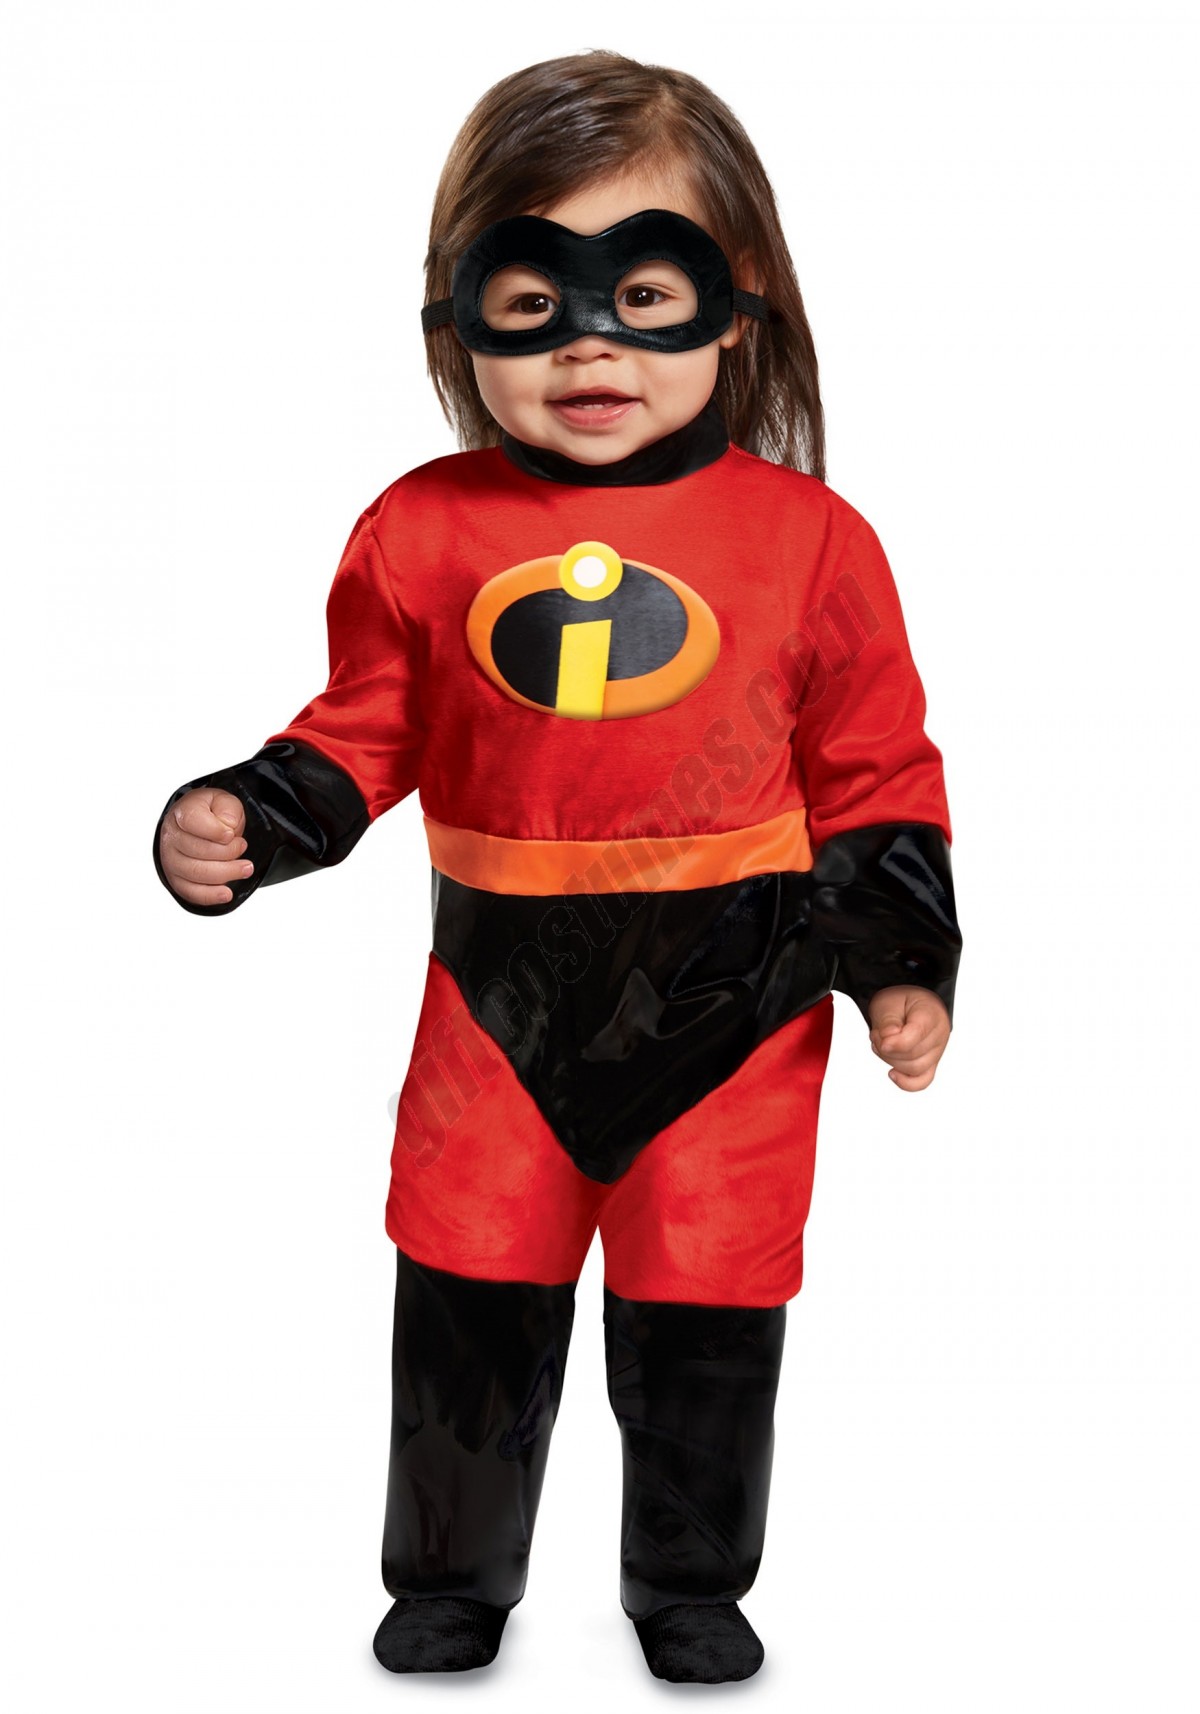 Disney Incredibles 2 Classic Baby Costume Promotions - -1